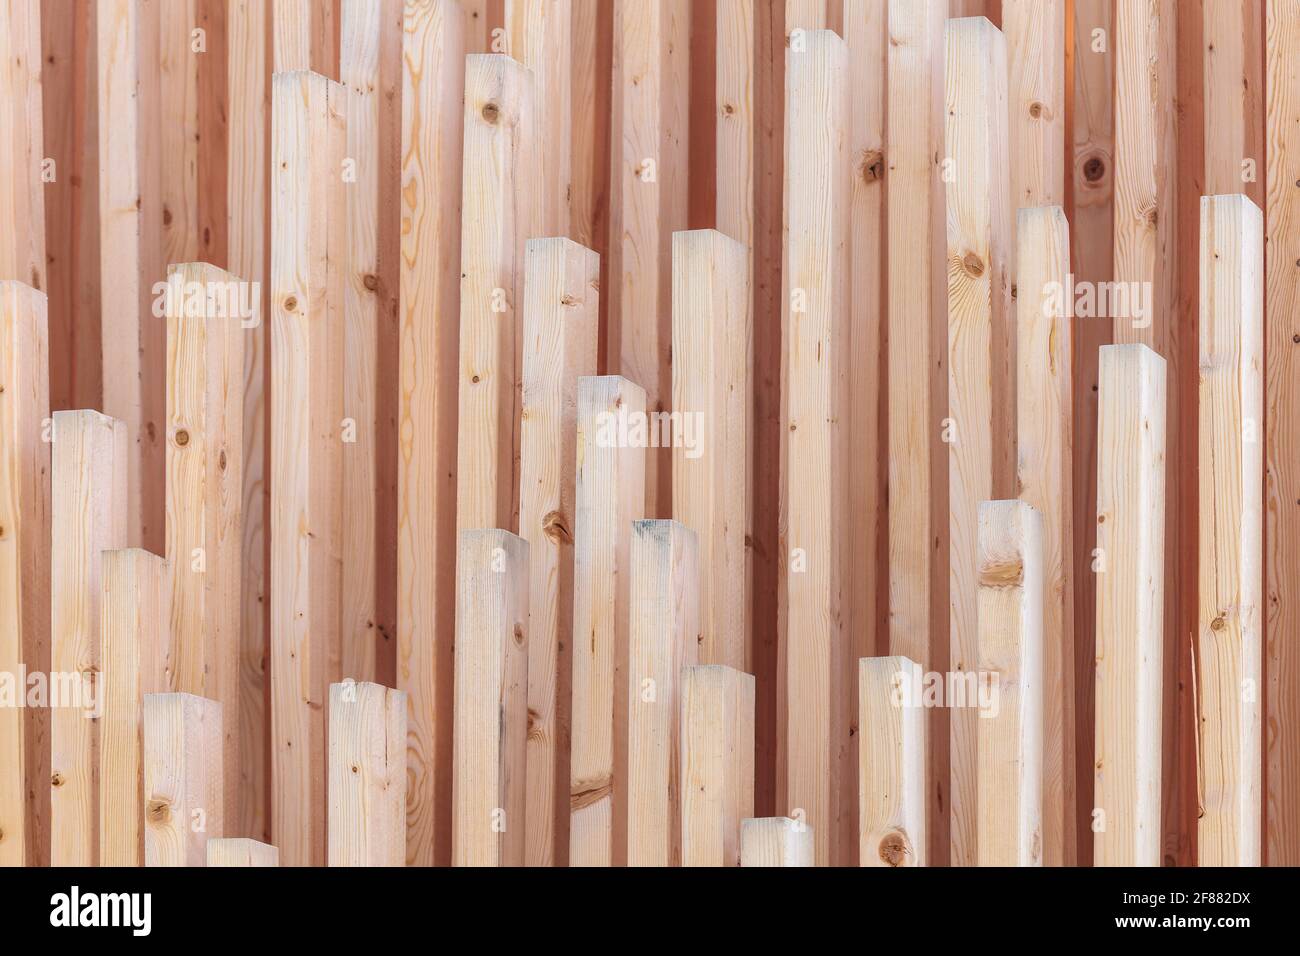 Vertical row of new wooden girders with different lenghts Stock Photo